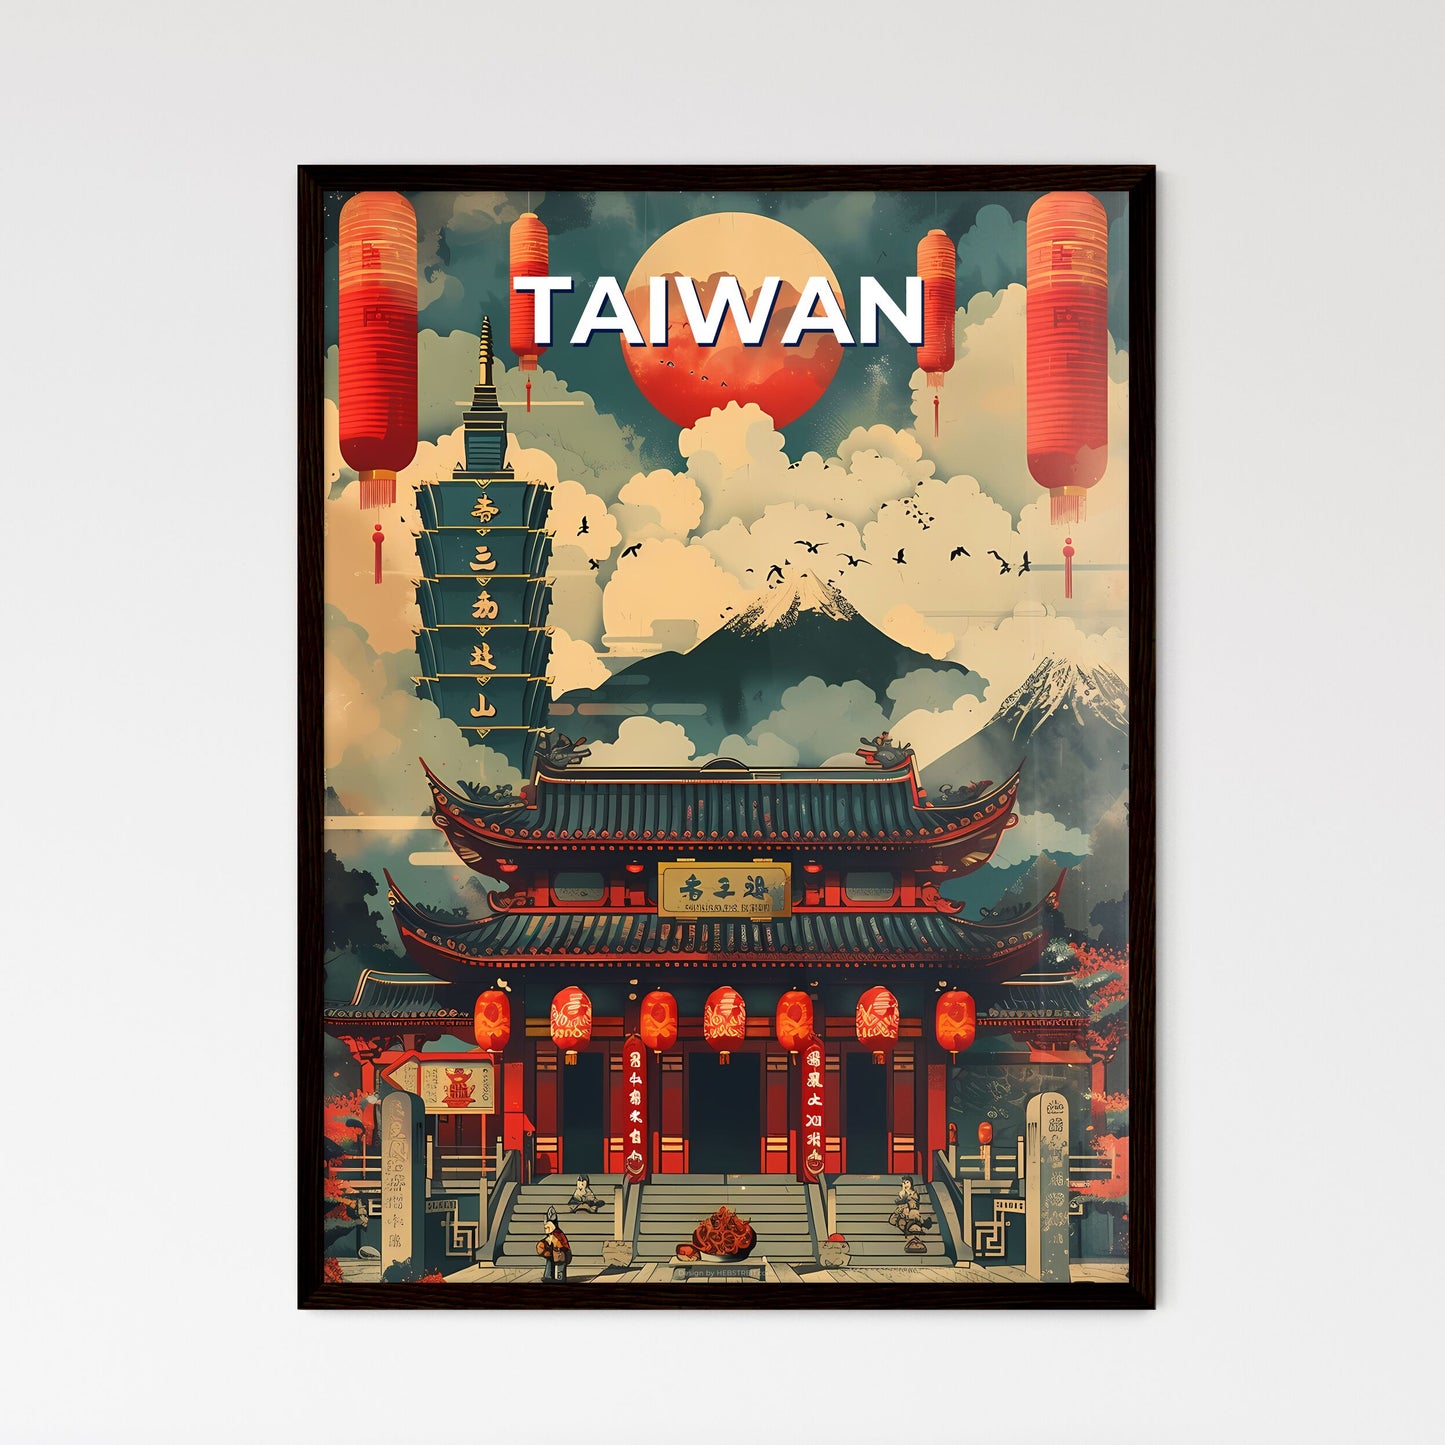 Vibrant Painting, Taiwan, East Asia, Mountains, Building, Lanterns, Art